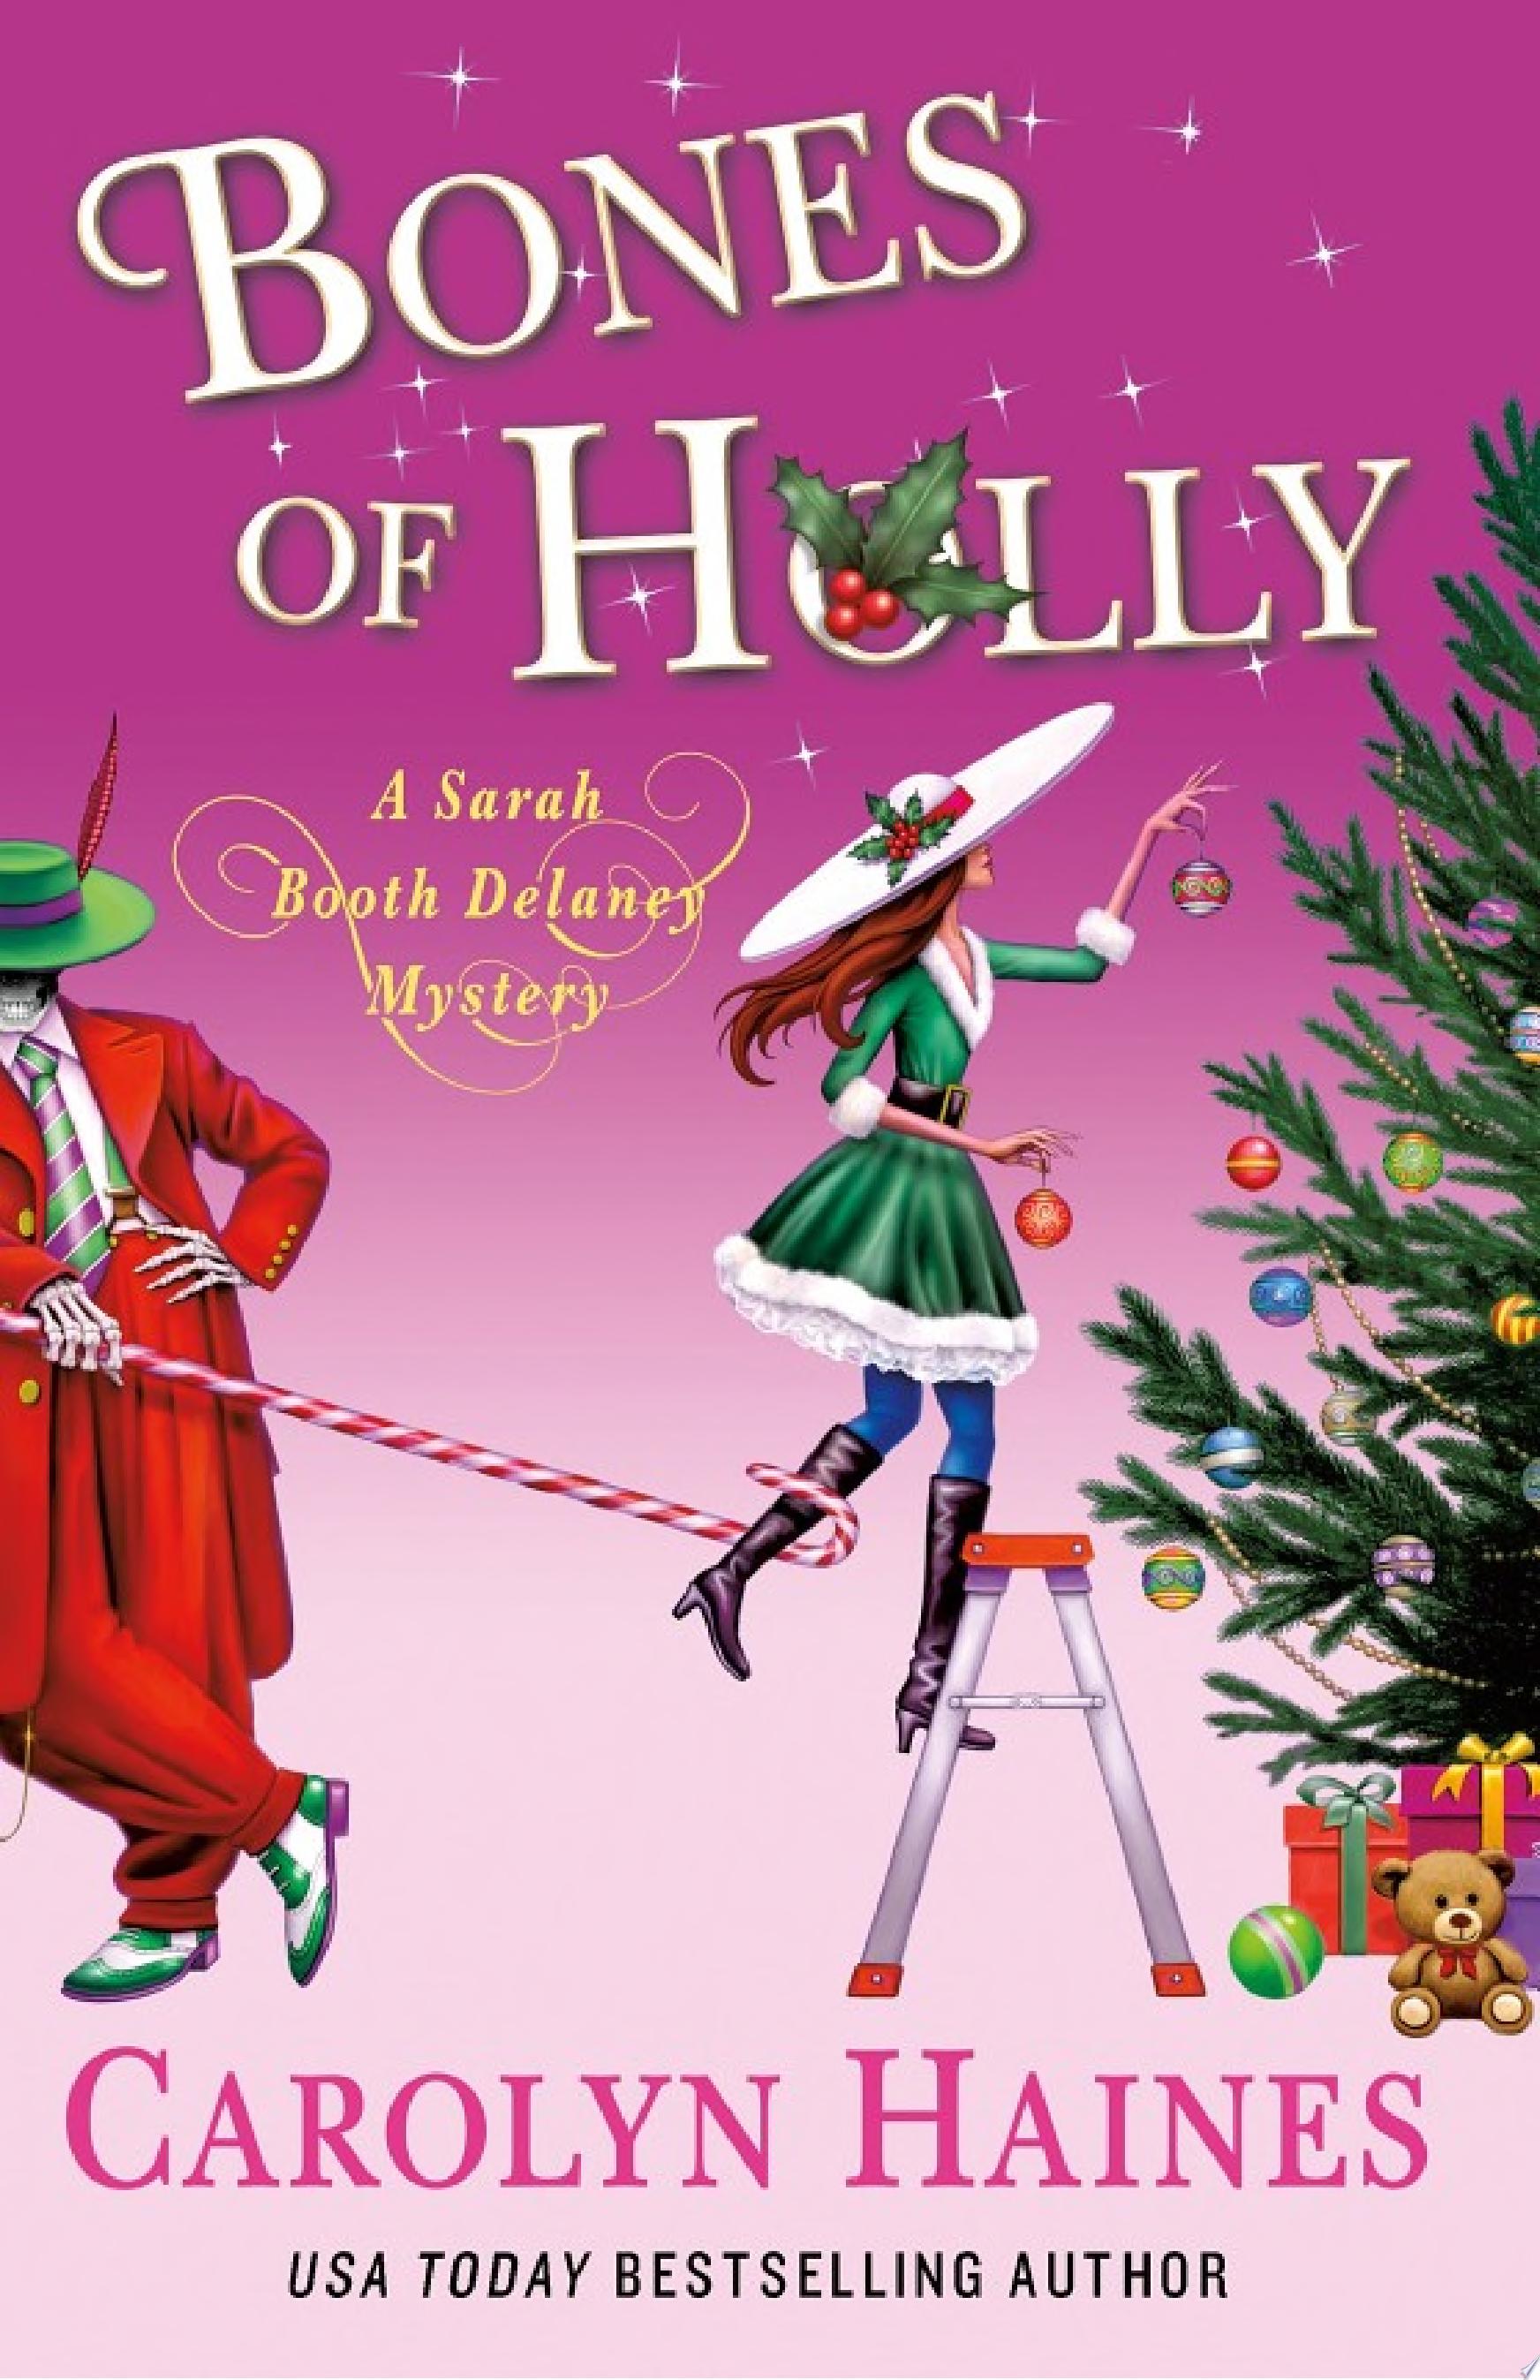 Image for "Bones of Holly"